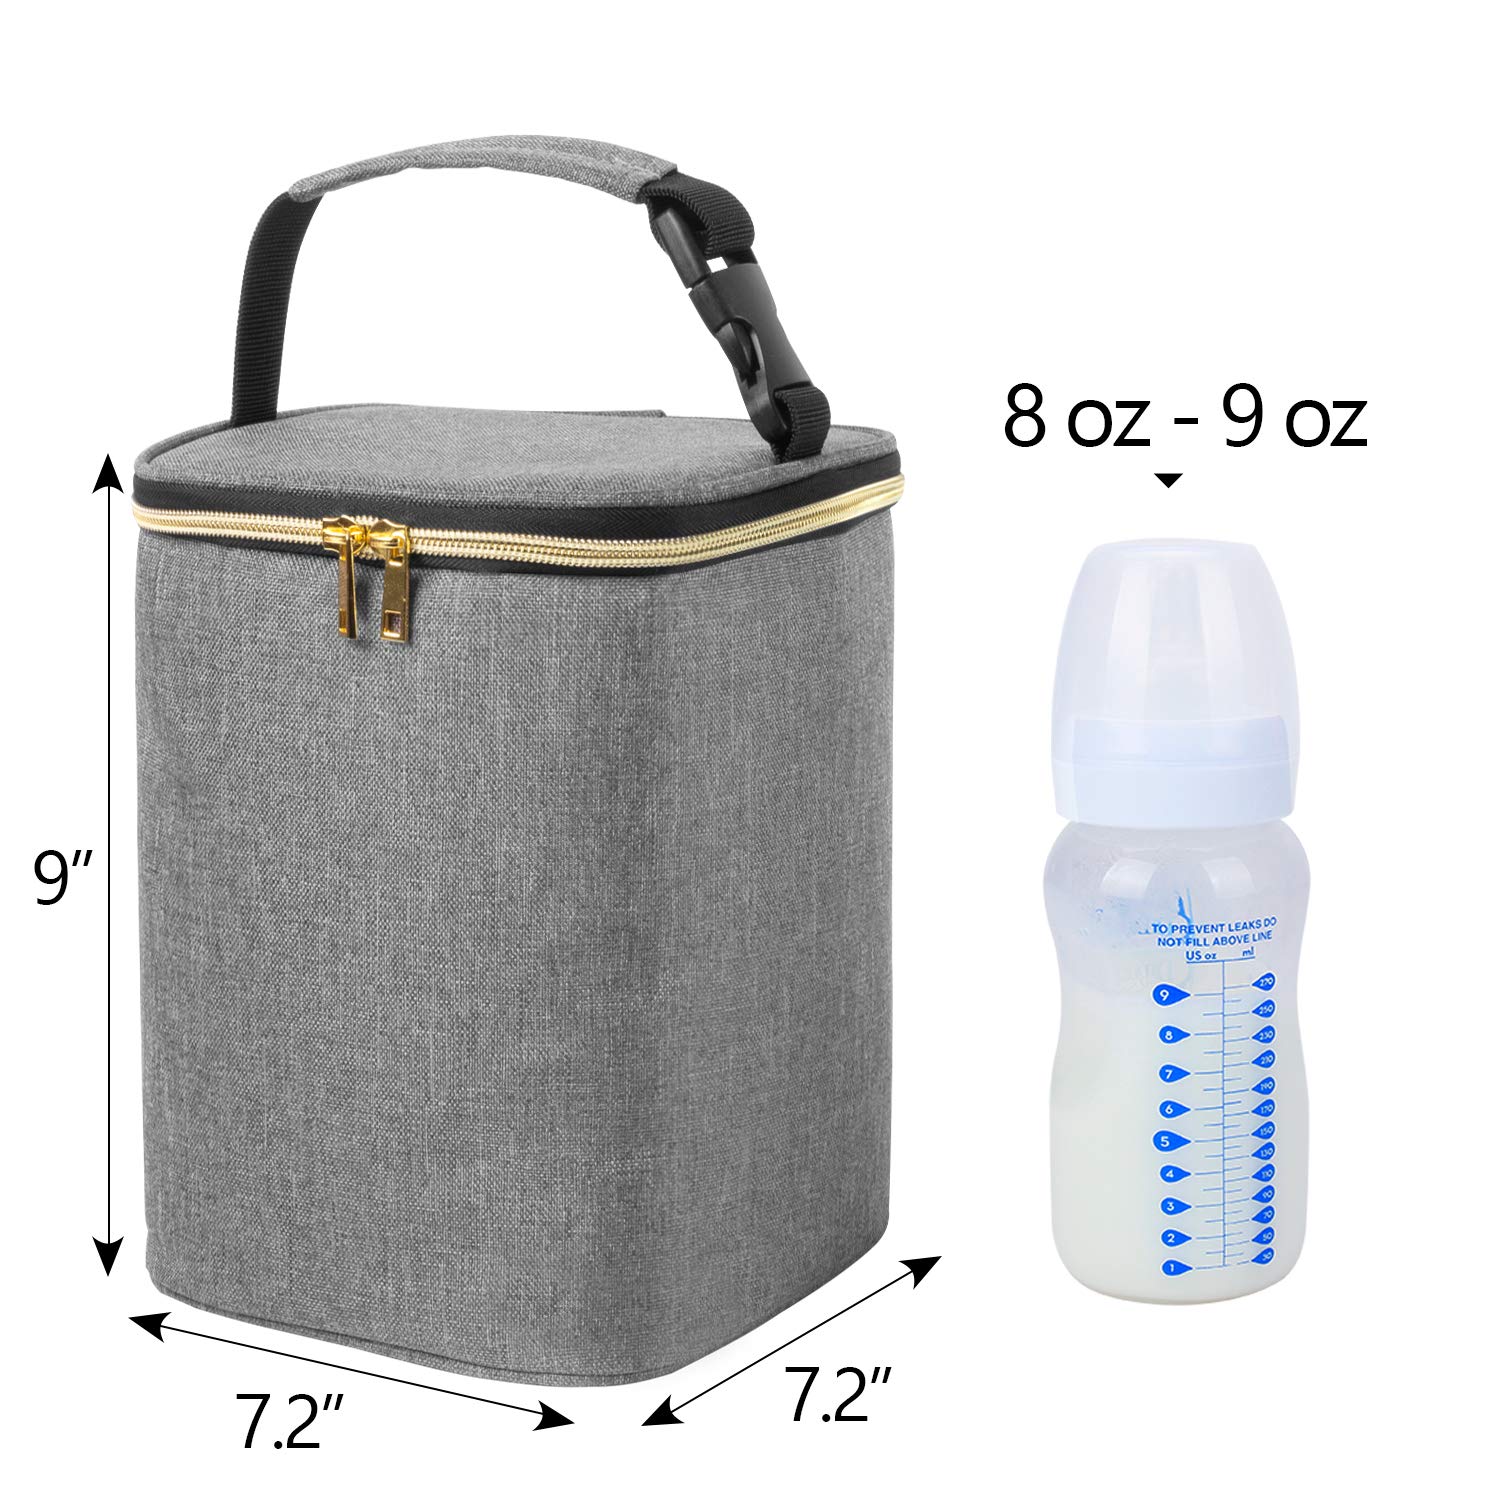 Teamoy Breastmilk Cooler Bag, Baby Bottles Bag for up to 4 Large 9 Ounce Bottles, Perfect for Working Mom Mother, (Bag ONLY), Gray